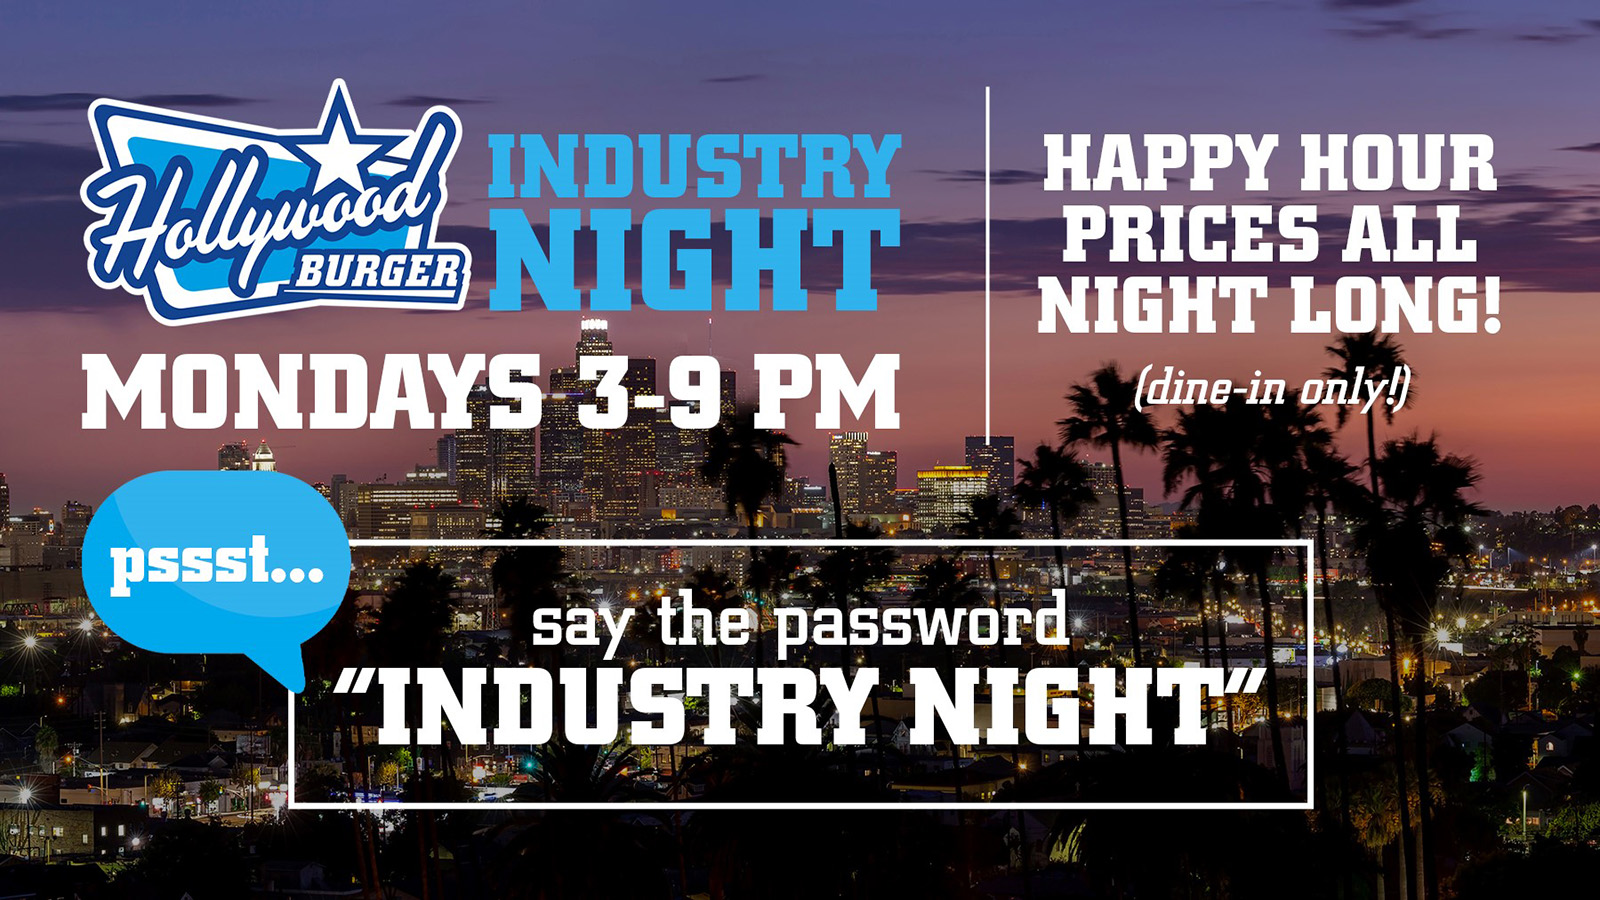 Industry Night Mondays 3-9PM. Happy Hour Prices All Night Long! Dine-in only, say the password "Industry NIght".